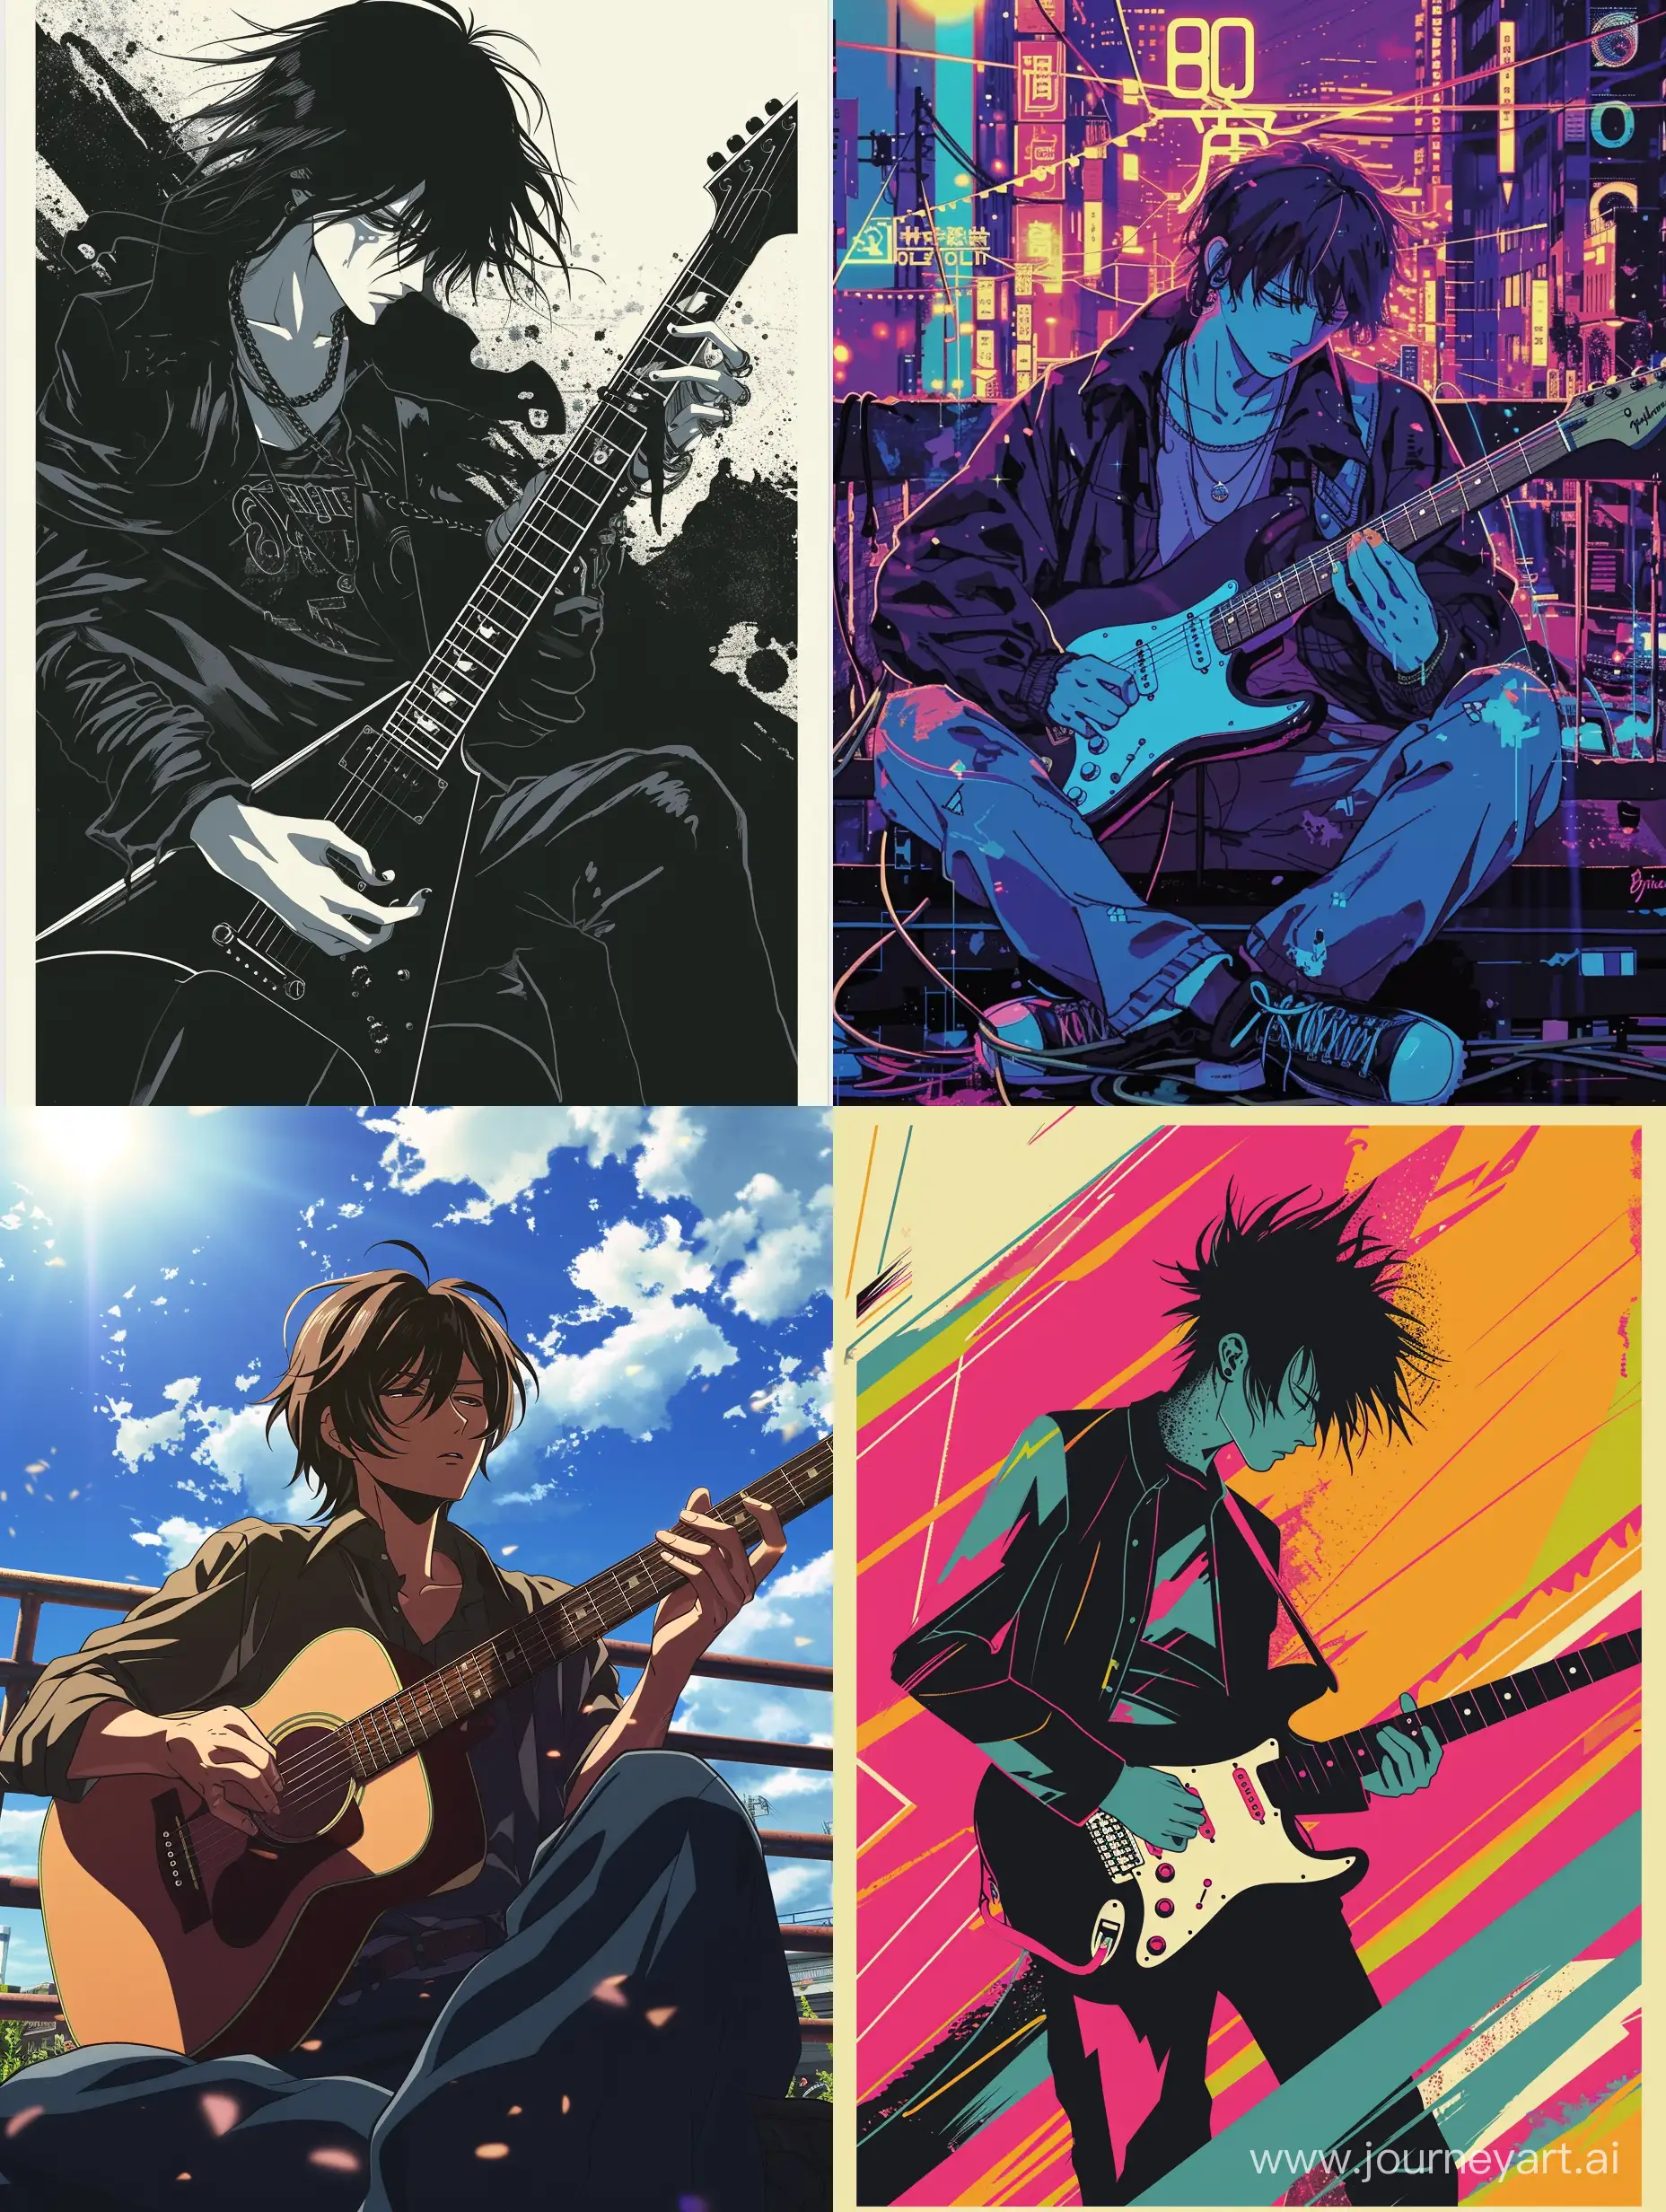 Anime-Style-Poster-Enchanting-Guitar-Player-in-80s-Vibes